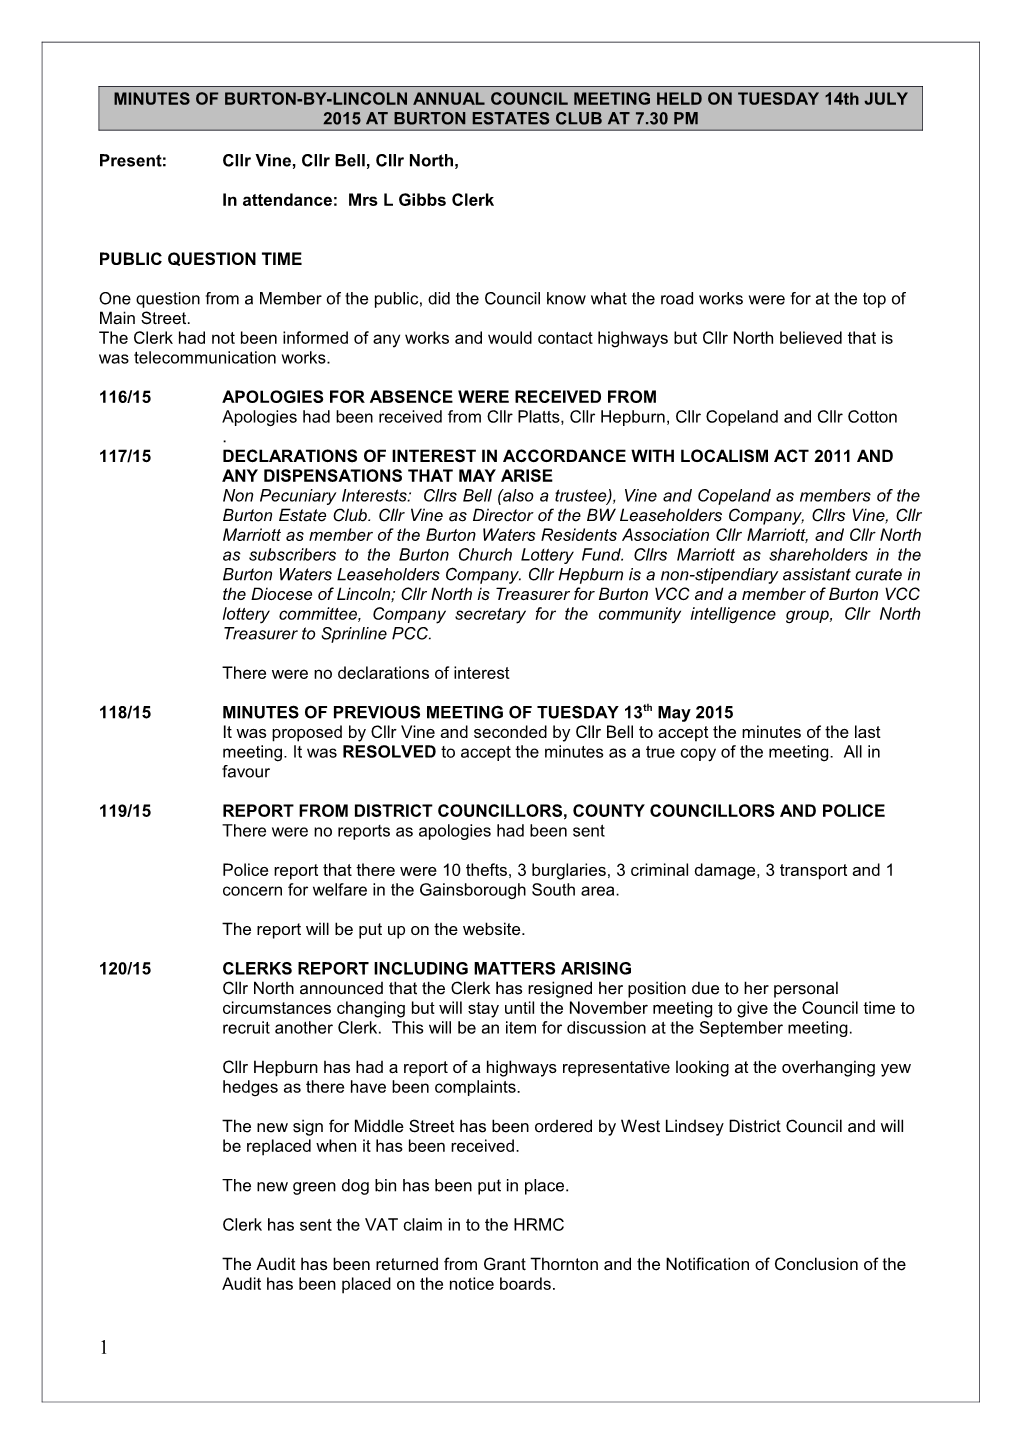 Minutes of Stow Council Meeting Held on Monday 14Th October 2013 at Stow Minster Church